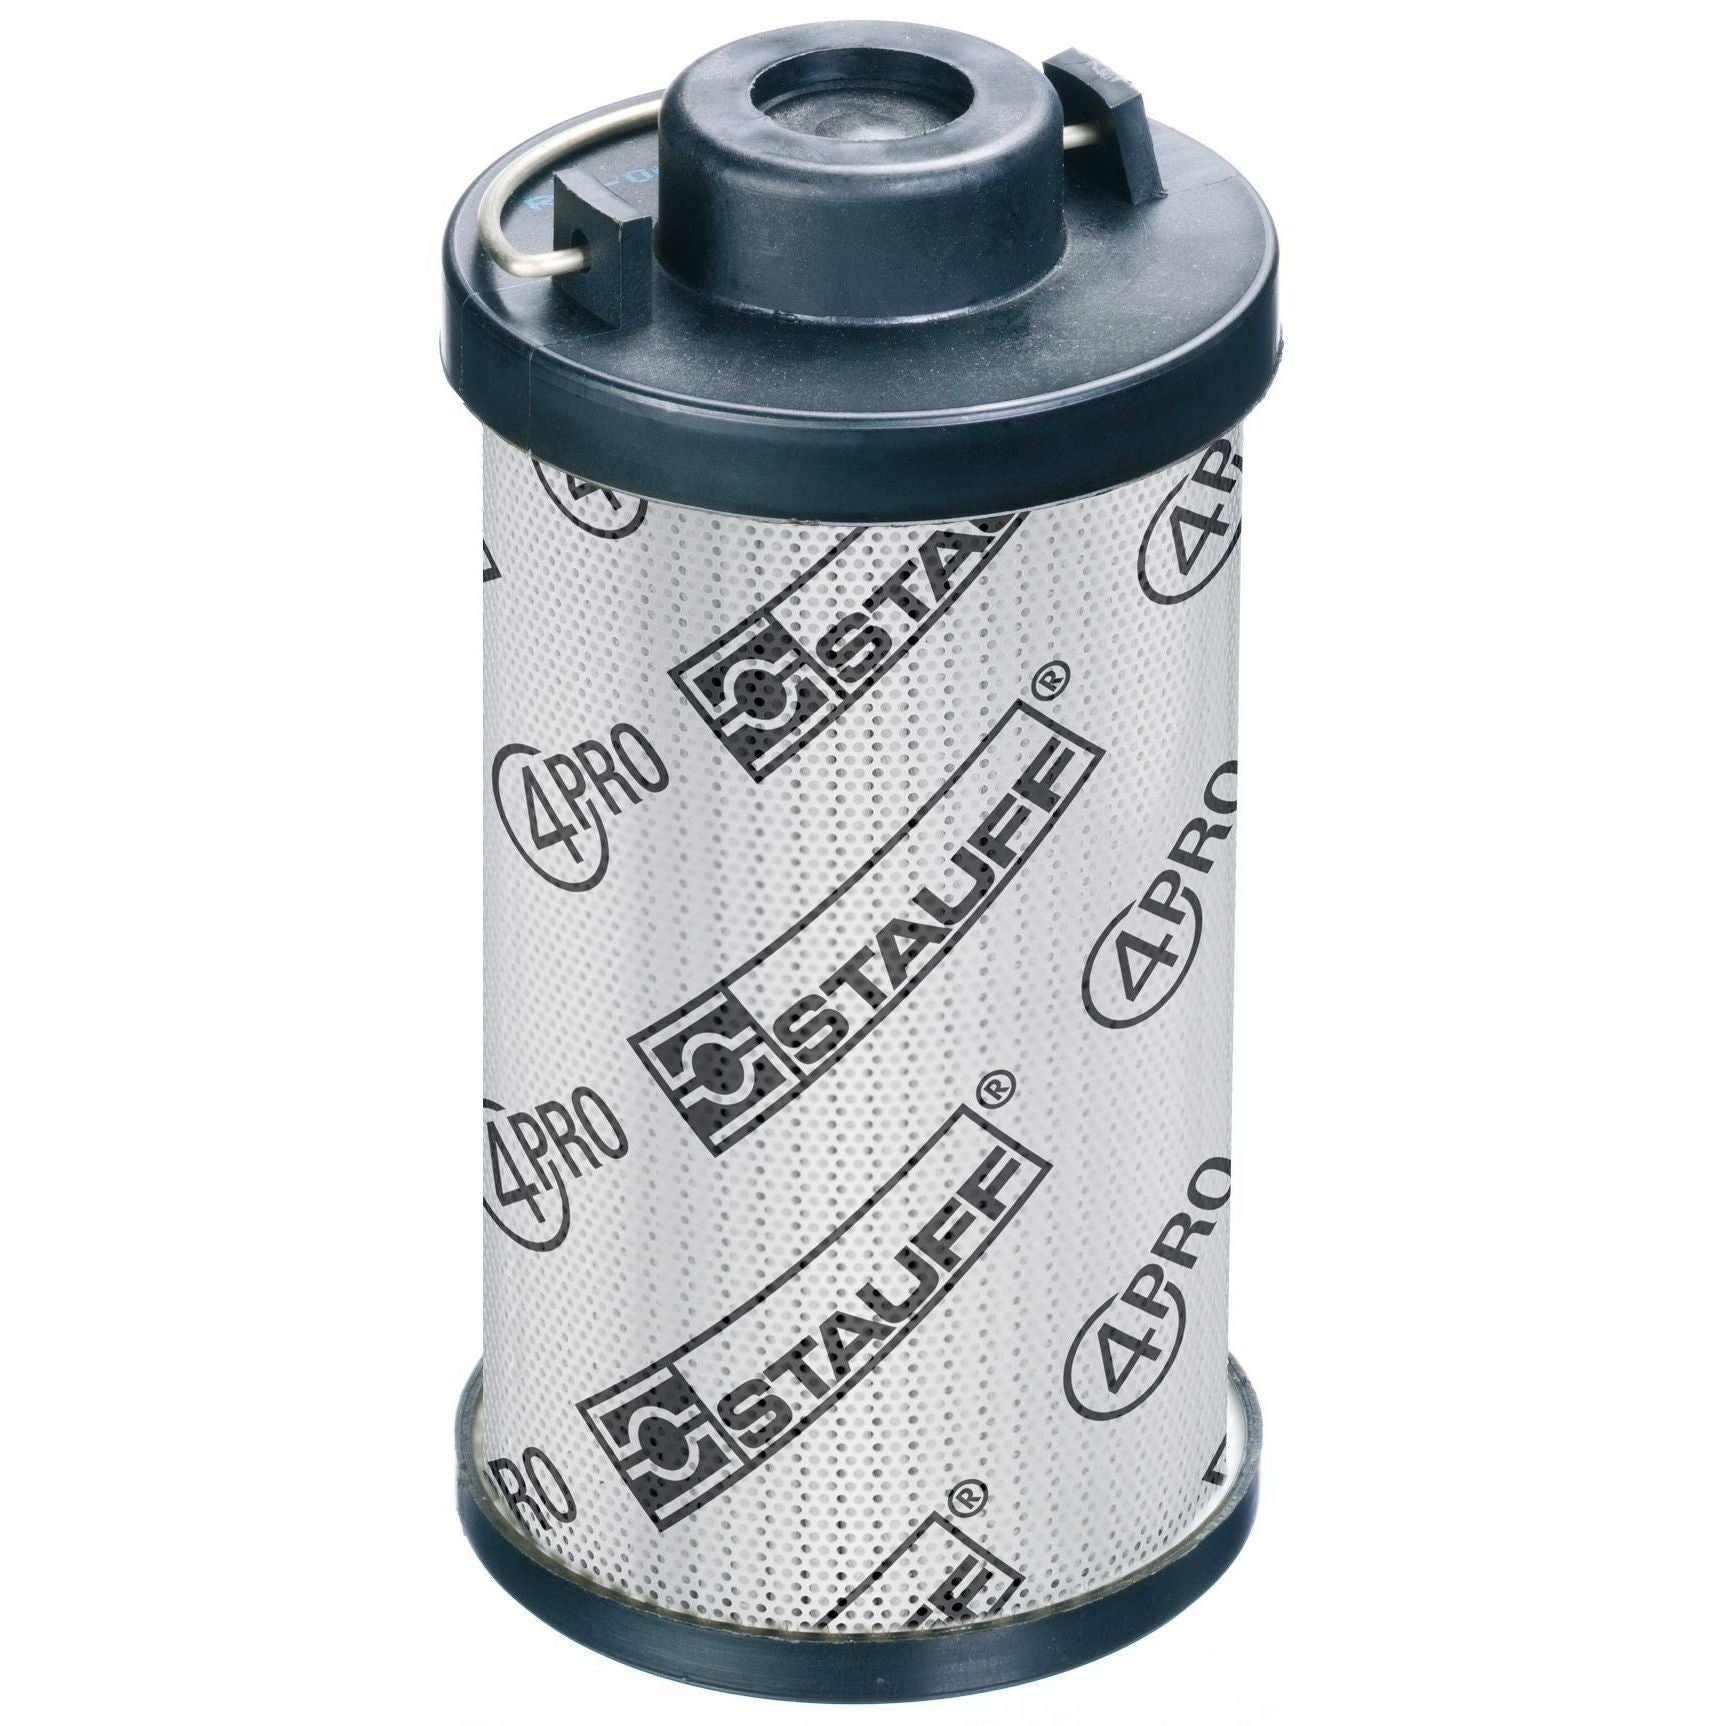 RE-250-G-20-B-B3/4 : Stauff RF-250 Series Filter Element, 20 Micron, Synthetic, 363psi Collapse Differential, Buna